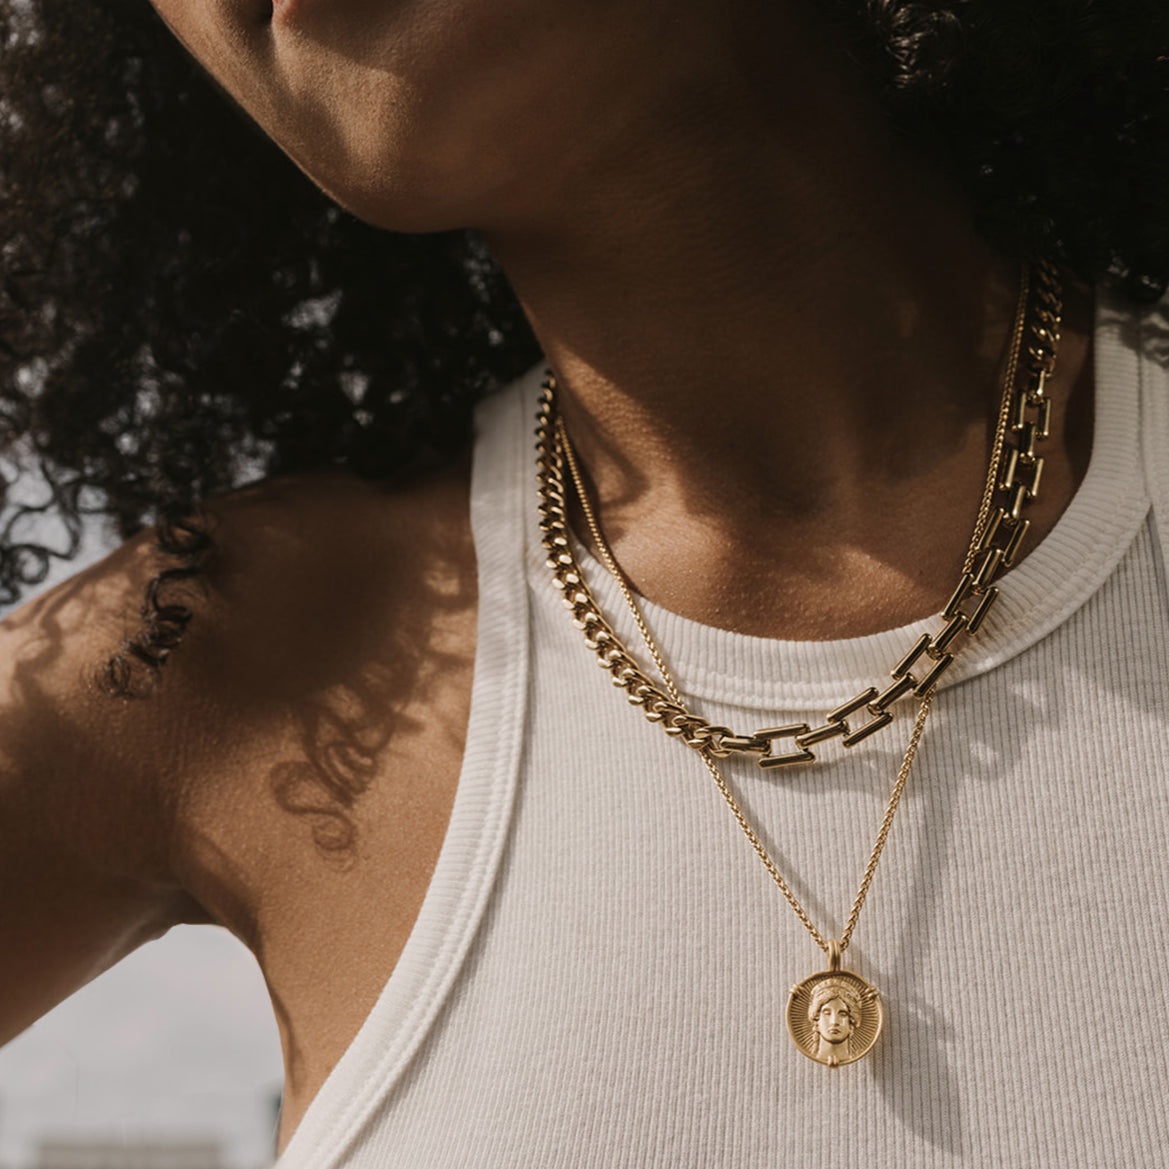 The Berlin Duo Chain Necklace by Mod + Jo